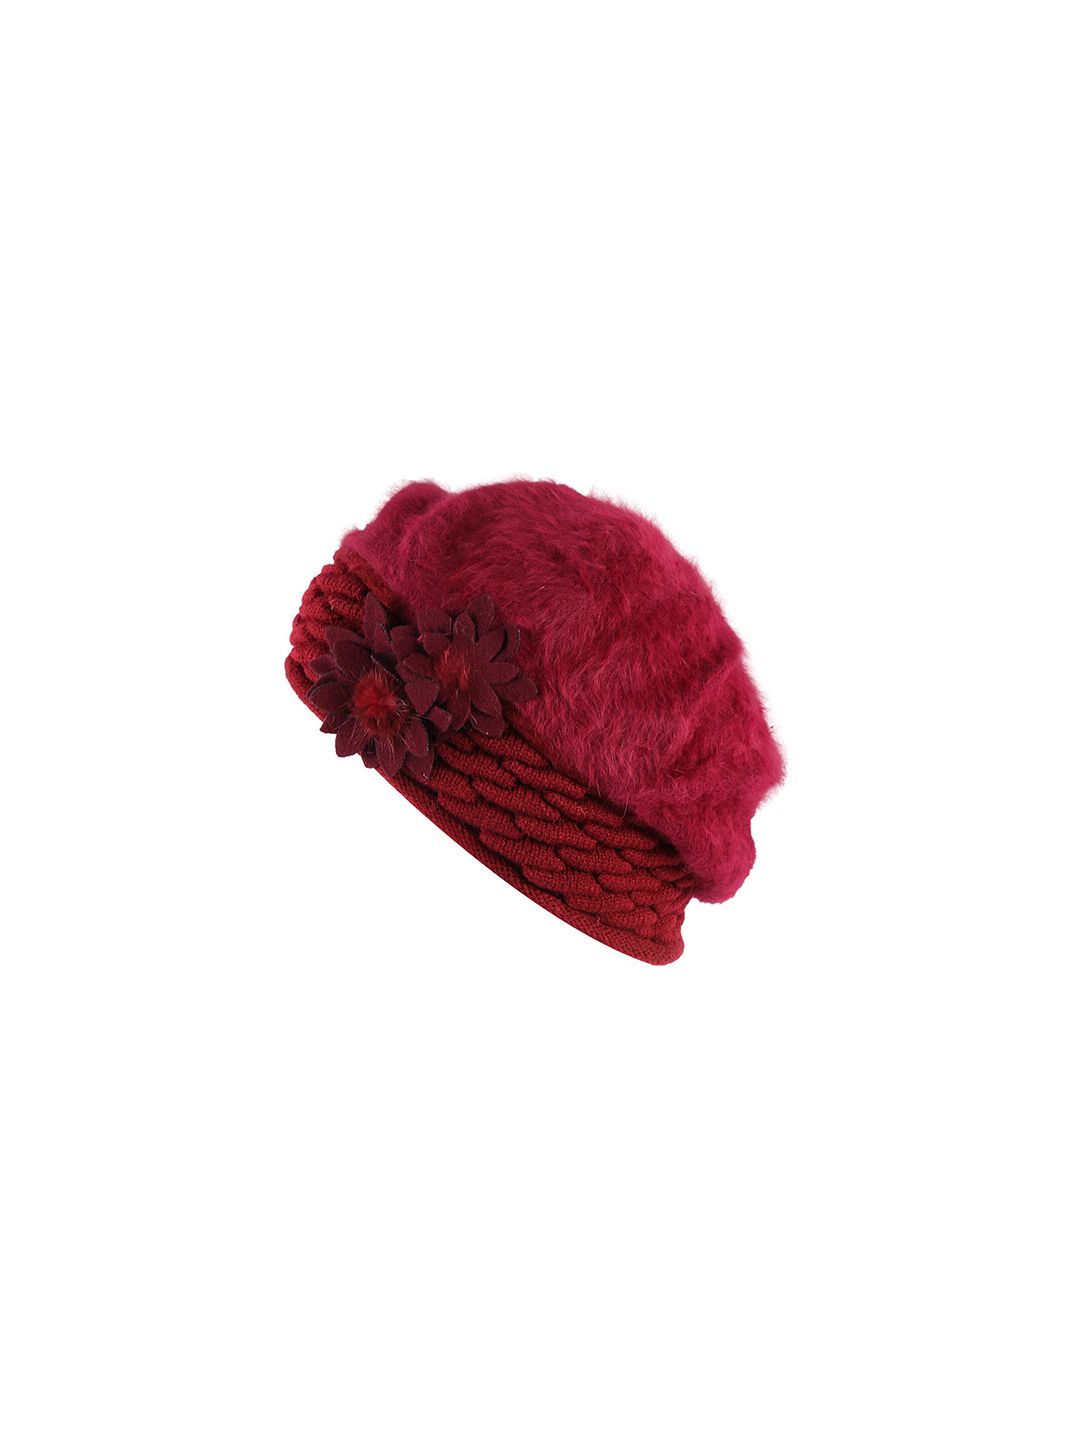 iSWEVEN Unisex Maroon Beanie Price in India